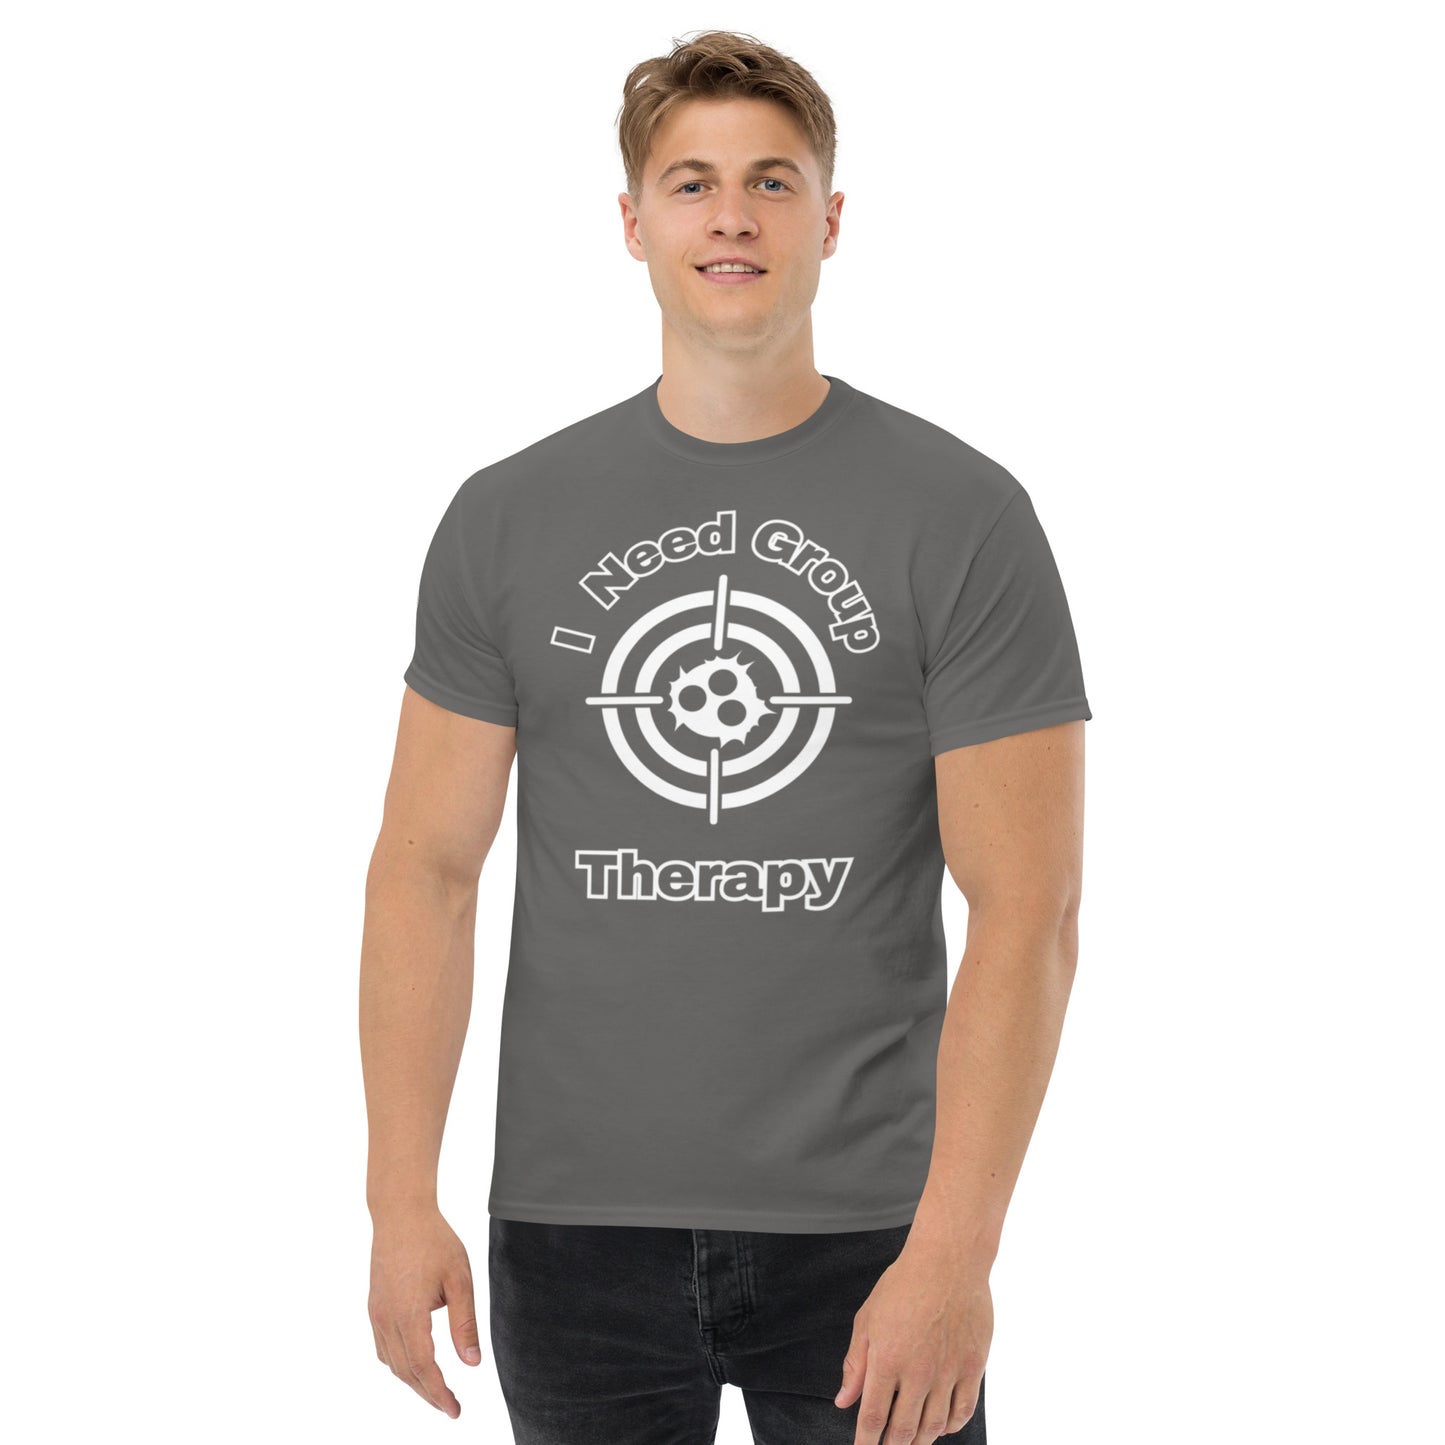 Men's classic tee " I Need Group Therapy "Show your Love of Range Time